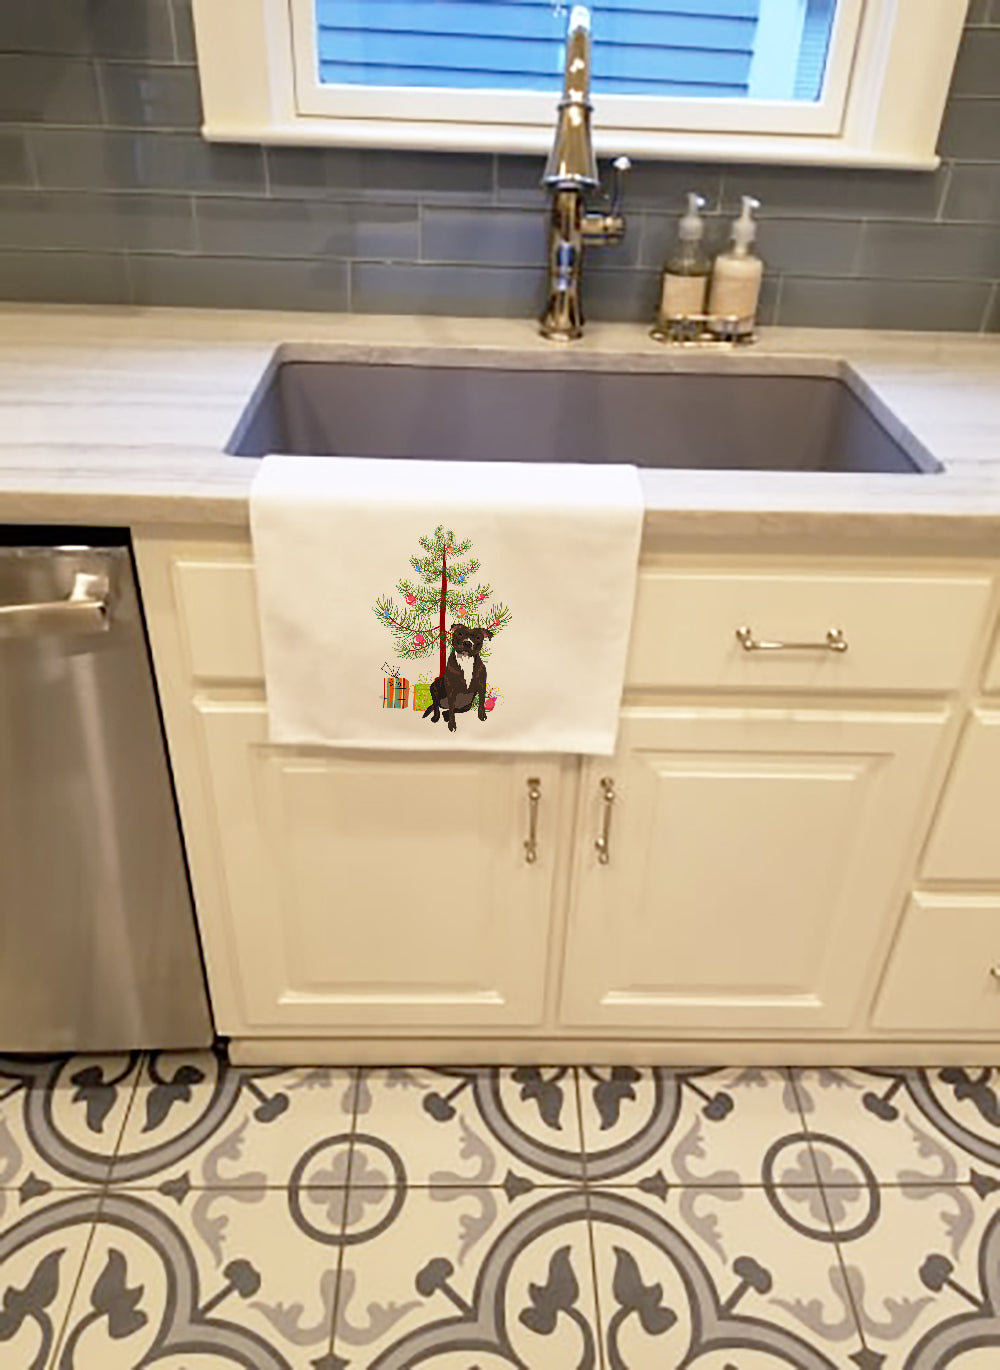 Buy this Pit Bull Brindle #2 Christmas White Kitchen Towel Set of 2